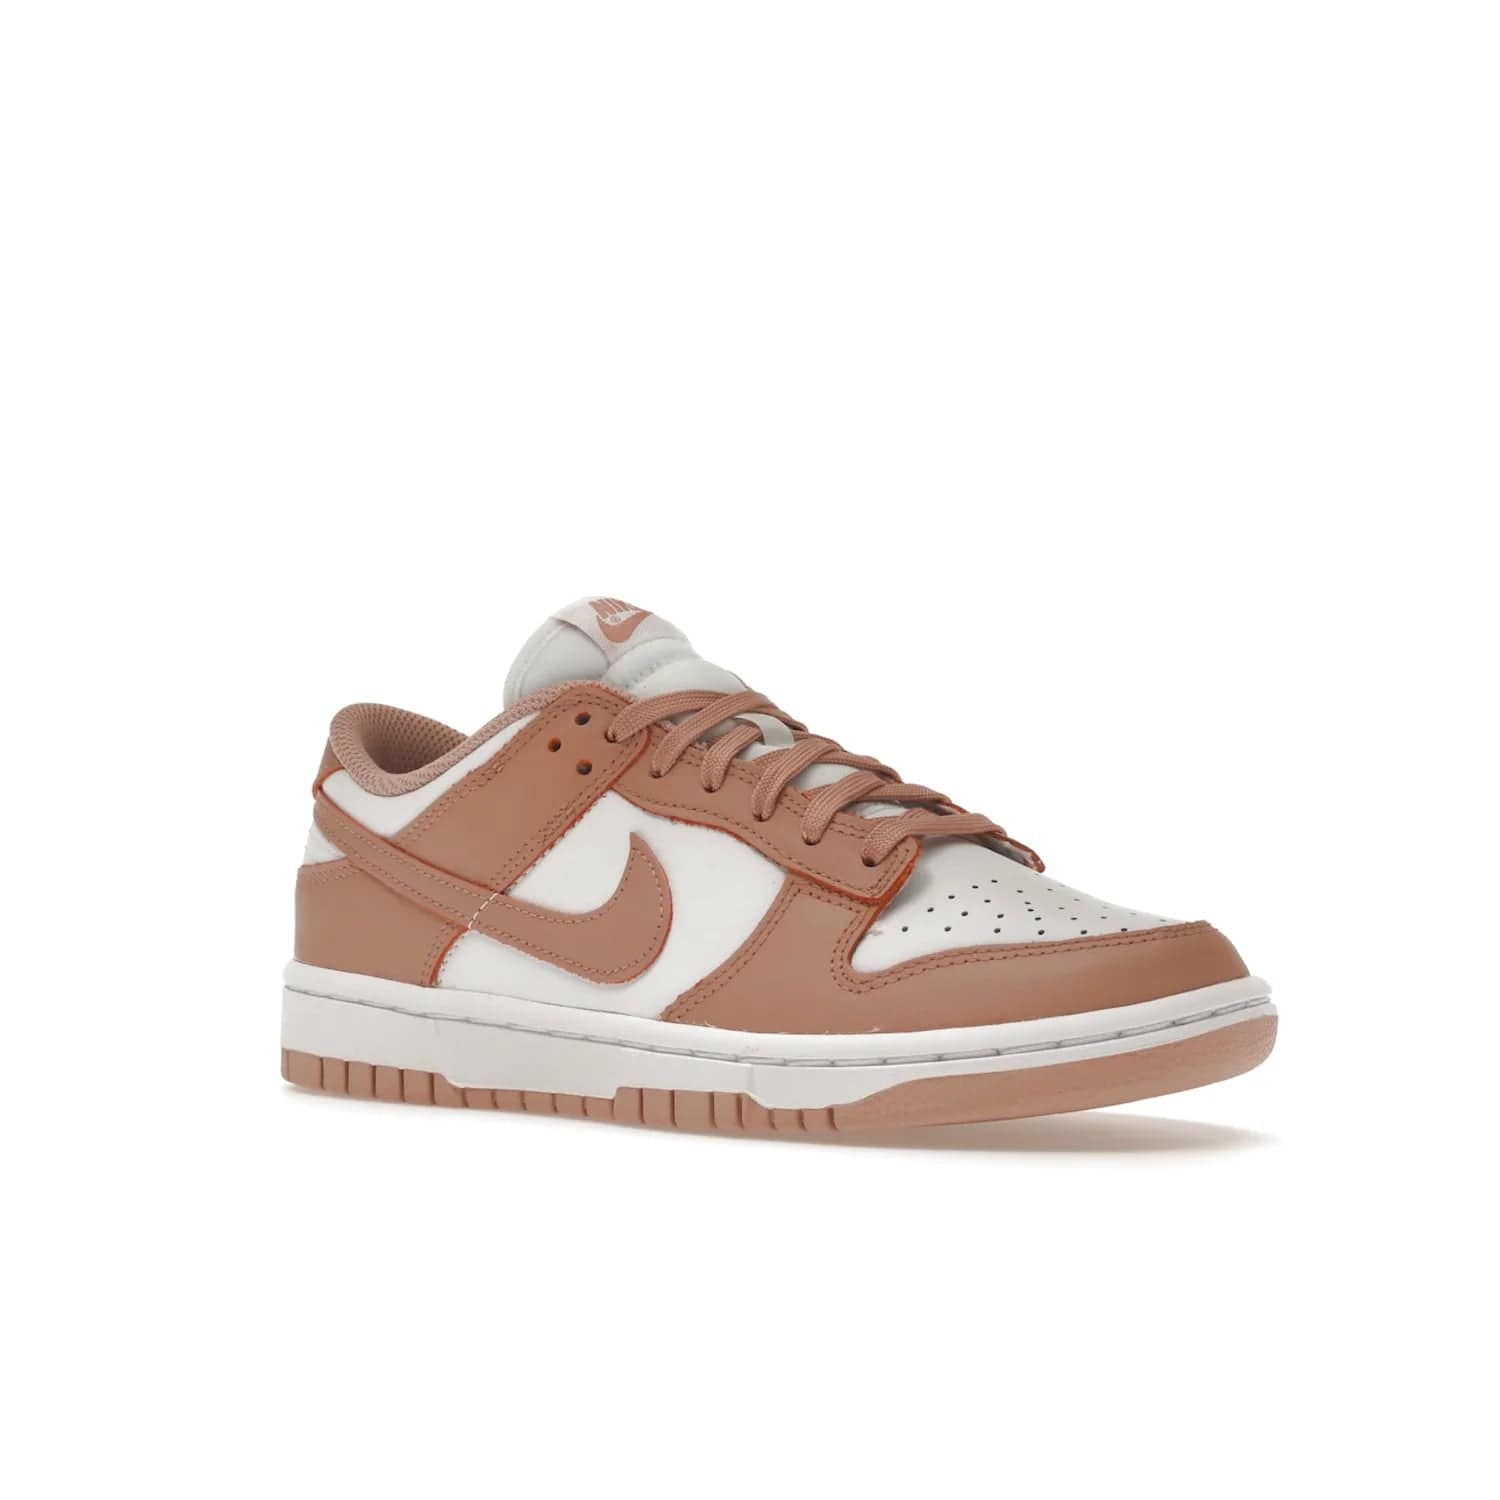 Nike Dunk Low Rose Whisper (Women's) - Image 5 - Only at www.BallersClubKickz.com - The Nike Dunk Low Rose Whisper is the perfect summer shoe with classic two-tone look and vintage-inspired design. Features white and Rose Whisper leather upper, woven tongue labels and EVA foam sole for plush cushioning. Available June 2022 at $100.